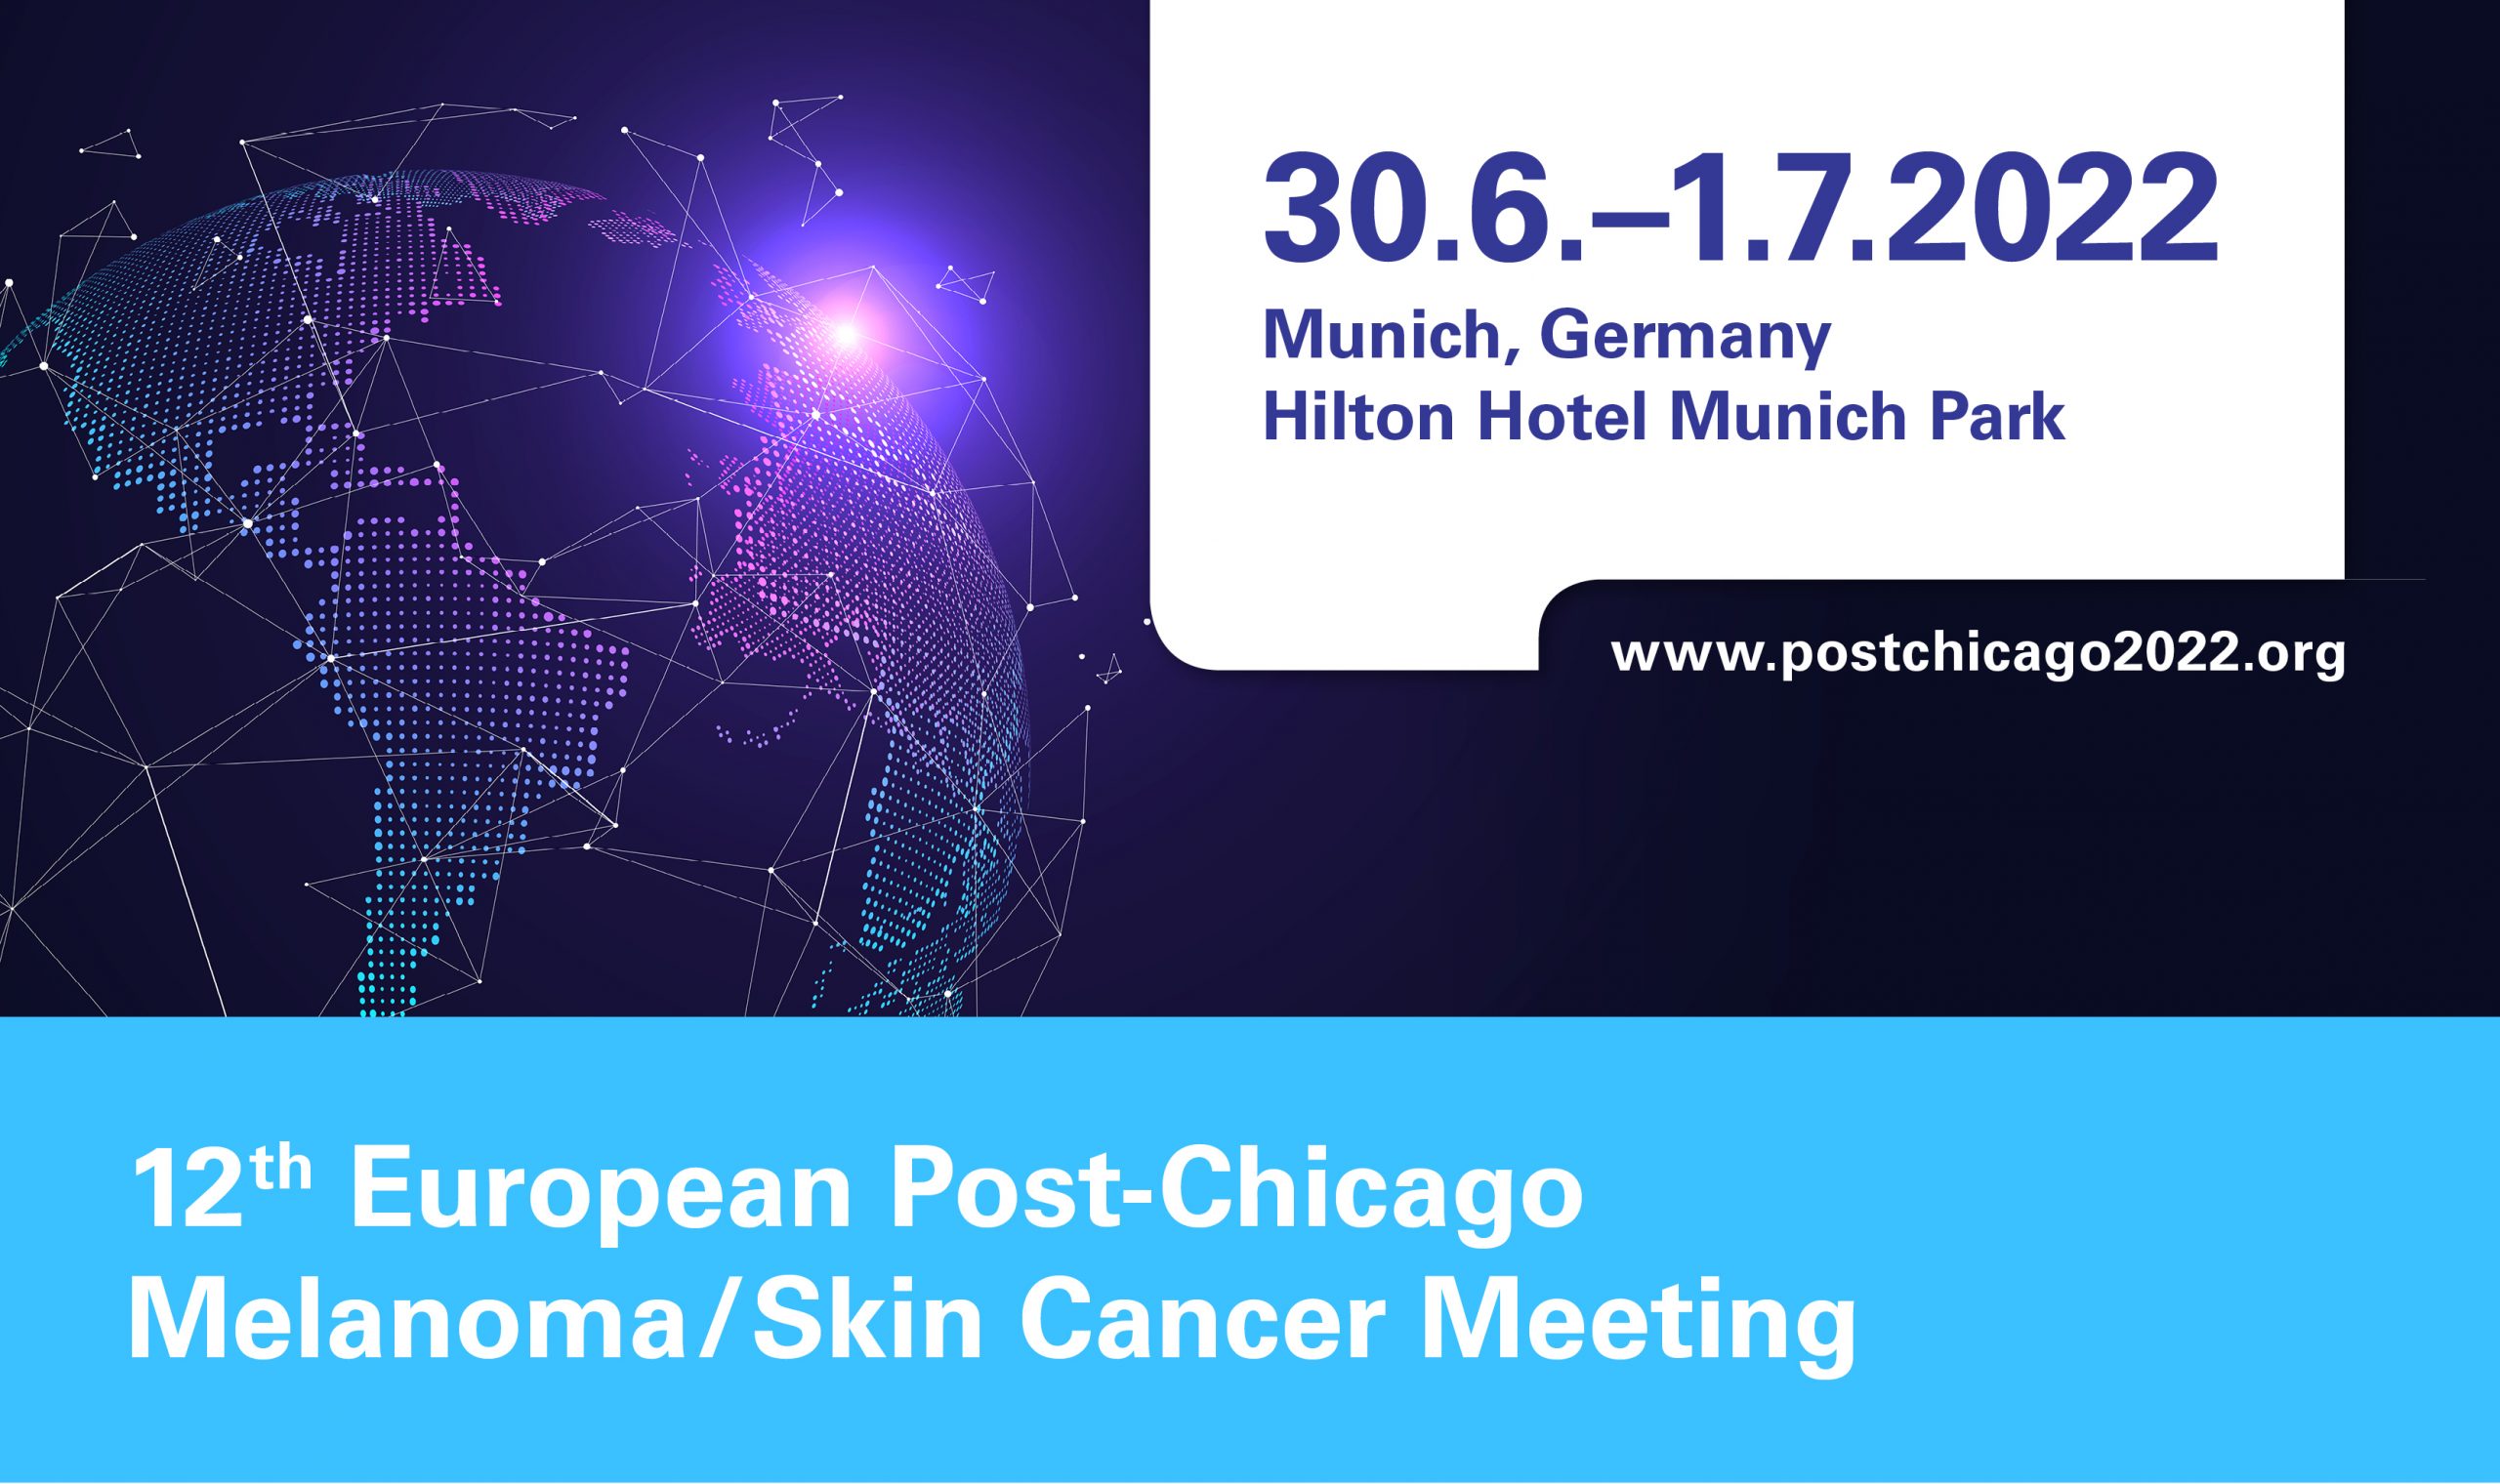 12th Post-Chicago Meeting on Melanoma / Skin Cancer Meeting